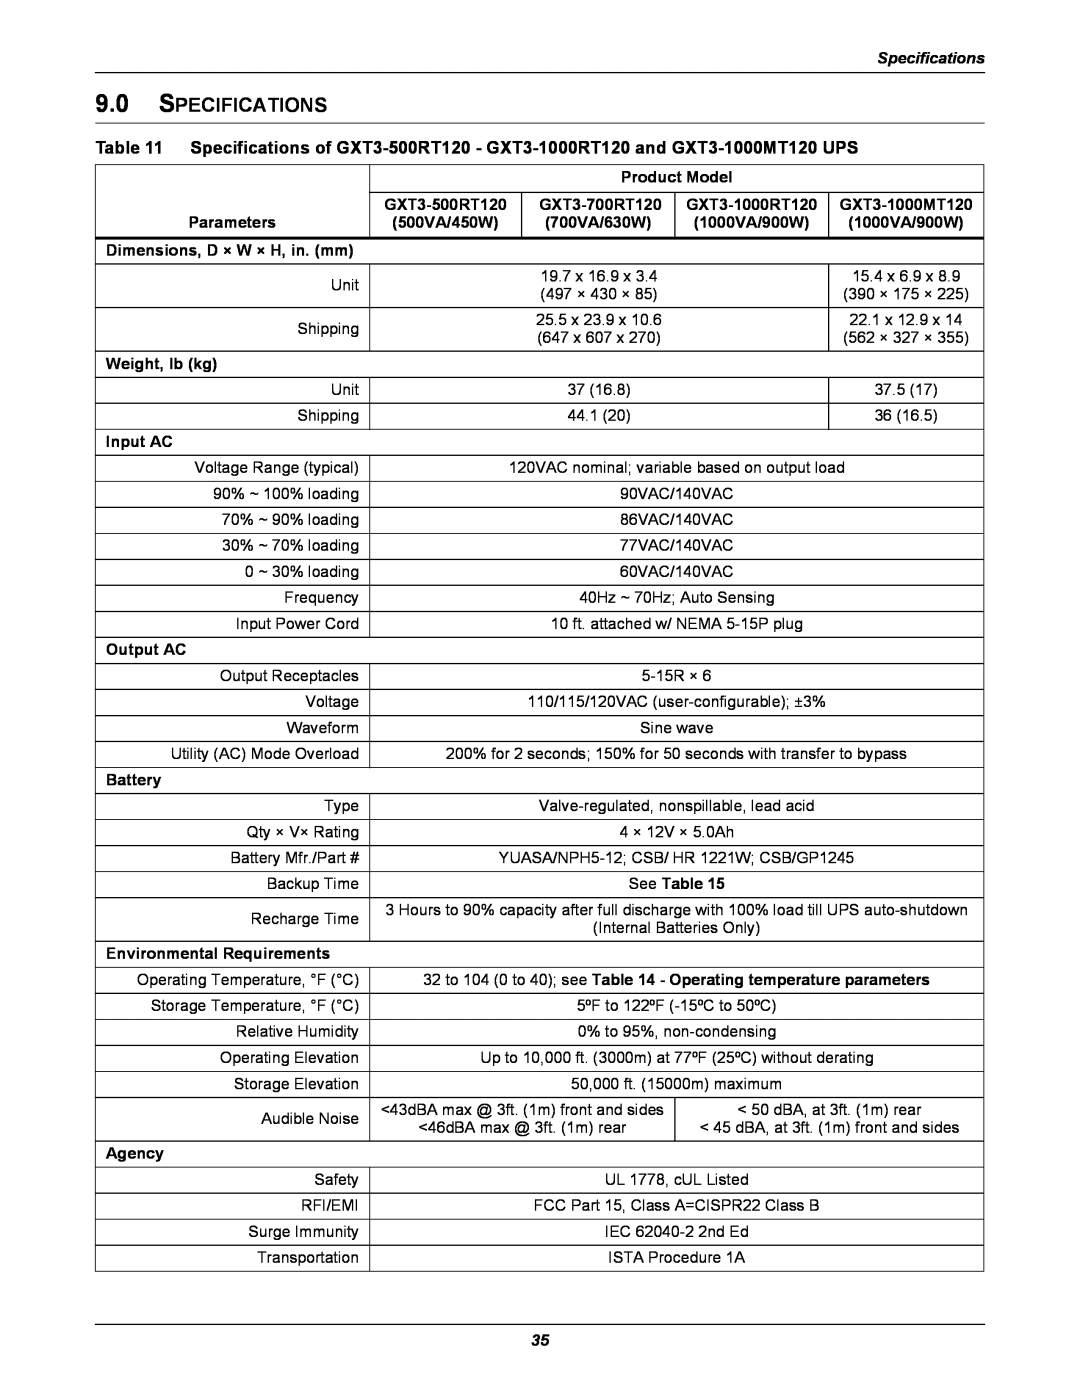 Emerson 208V, GXT3 user manual Specifications 